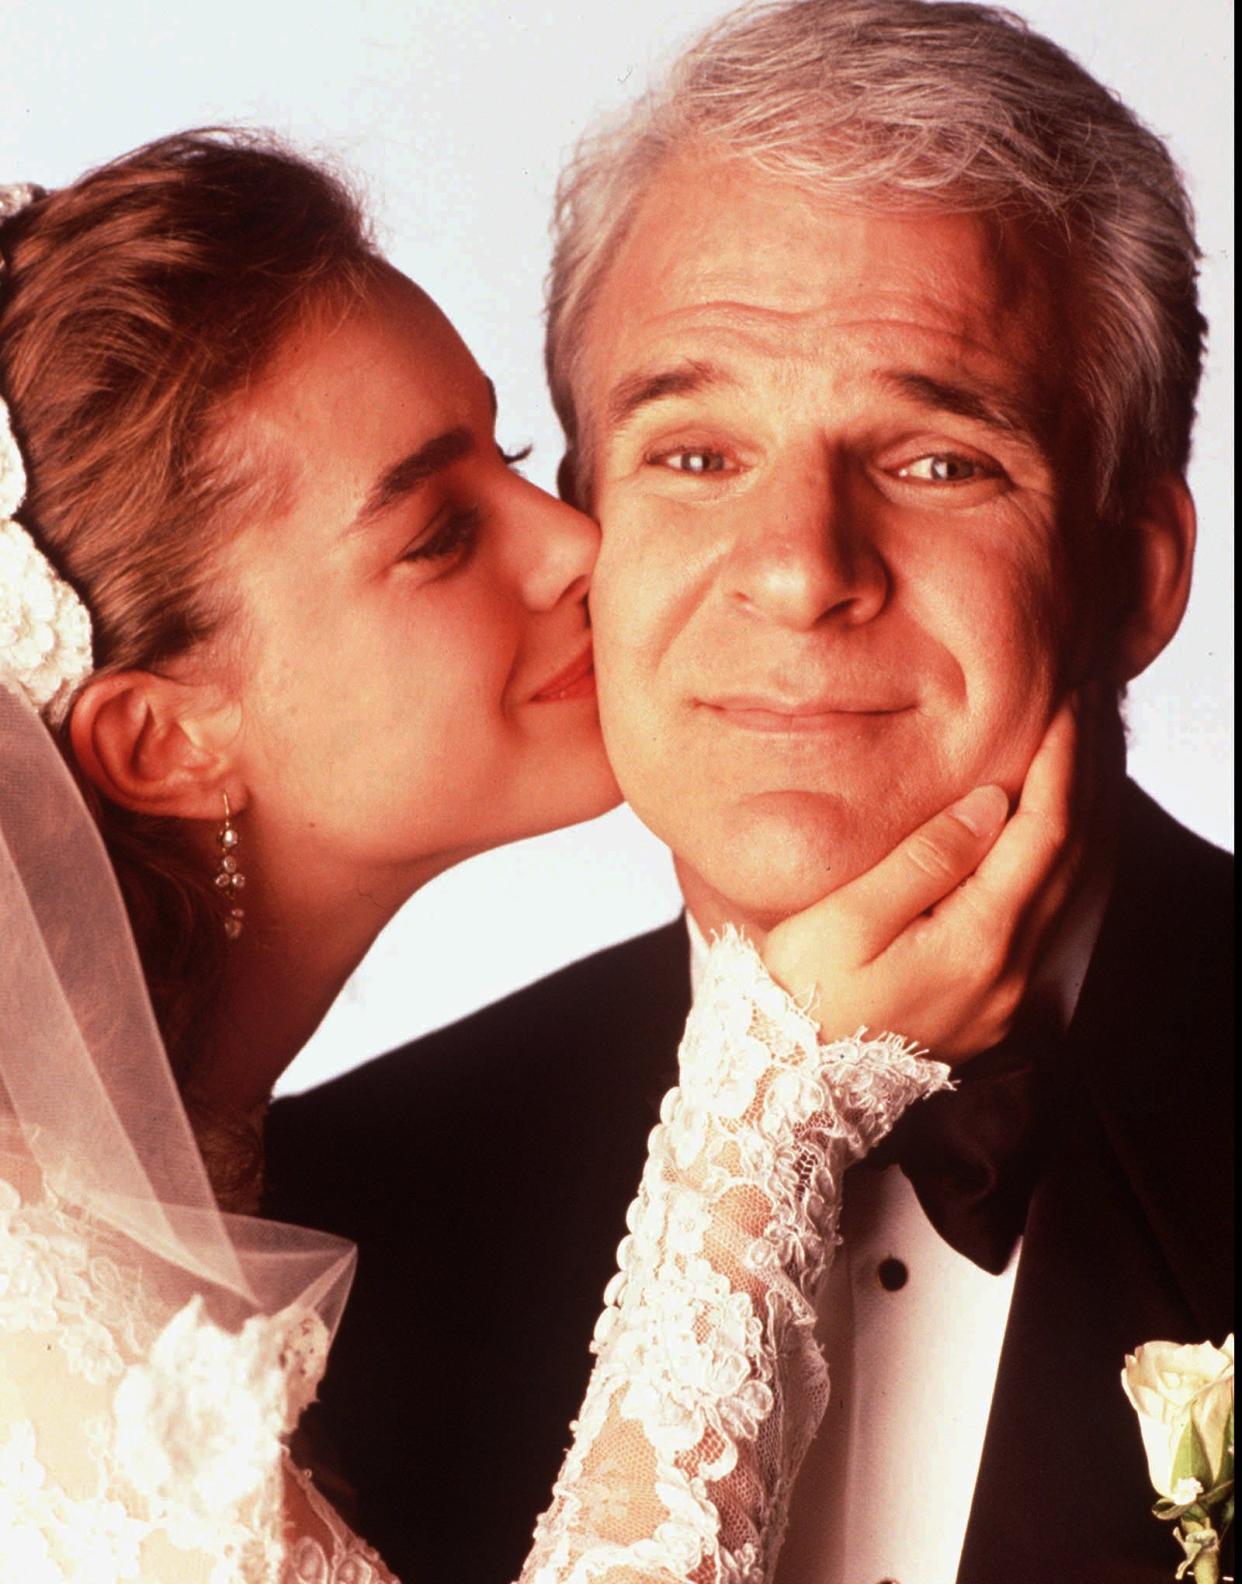 Kimberly Williams, left, and Steve Martin in a promotional still for 